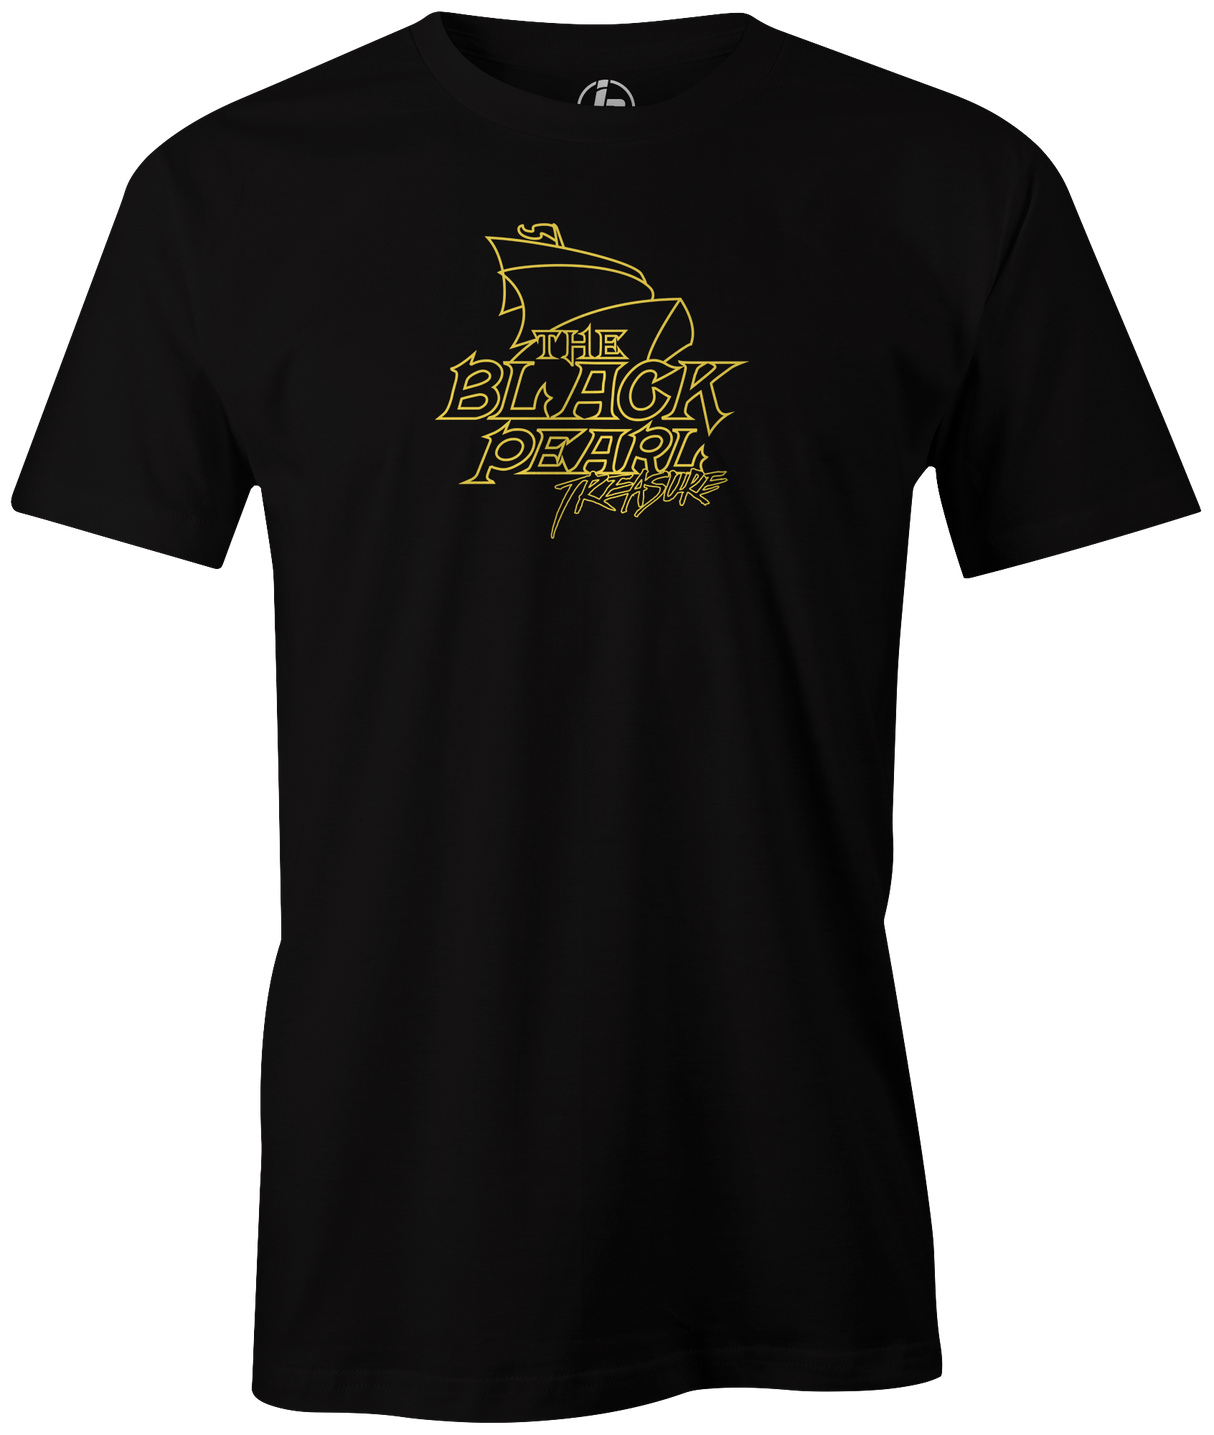 The Black Pearl Treasure by Swag Bowling. Swag Bowling Classic Logo T-shirt. This shirt is perfect for bowling practice, leagues or weekend tournaments. Men's T-Shirt, bowling ball, tee, tee shirt, tee-shirt, t shirt, t-shirt, tees, league, tournament shirt, PBA, PWBA, USBC. 